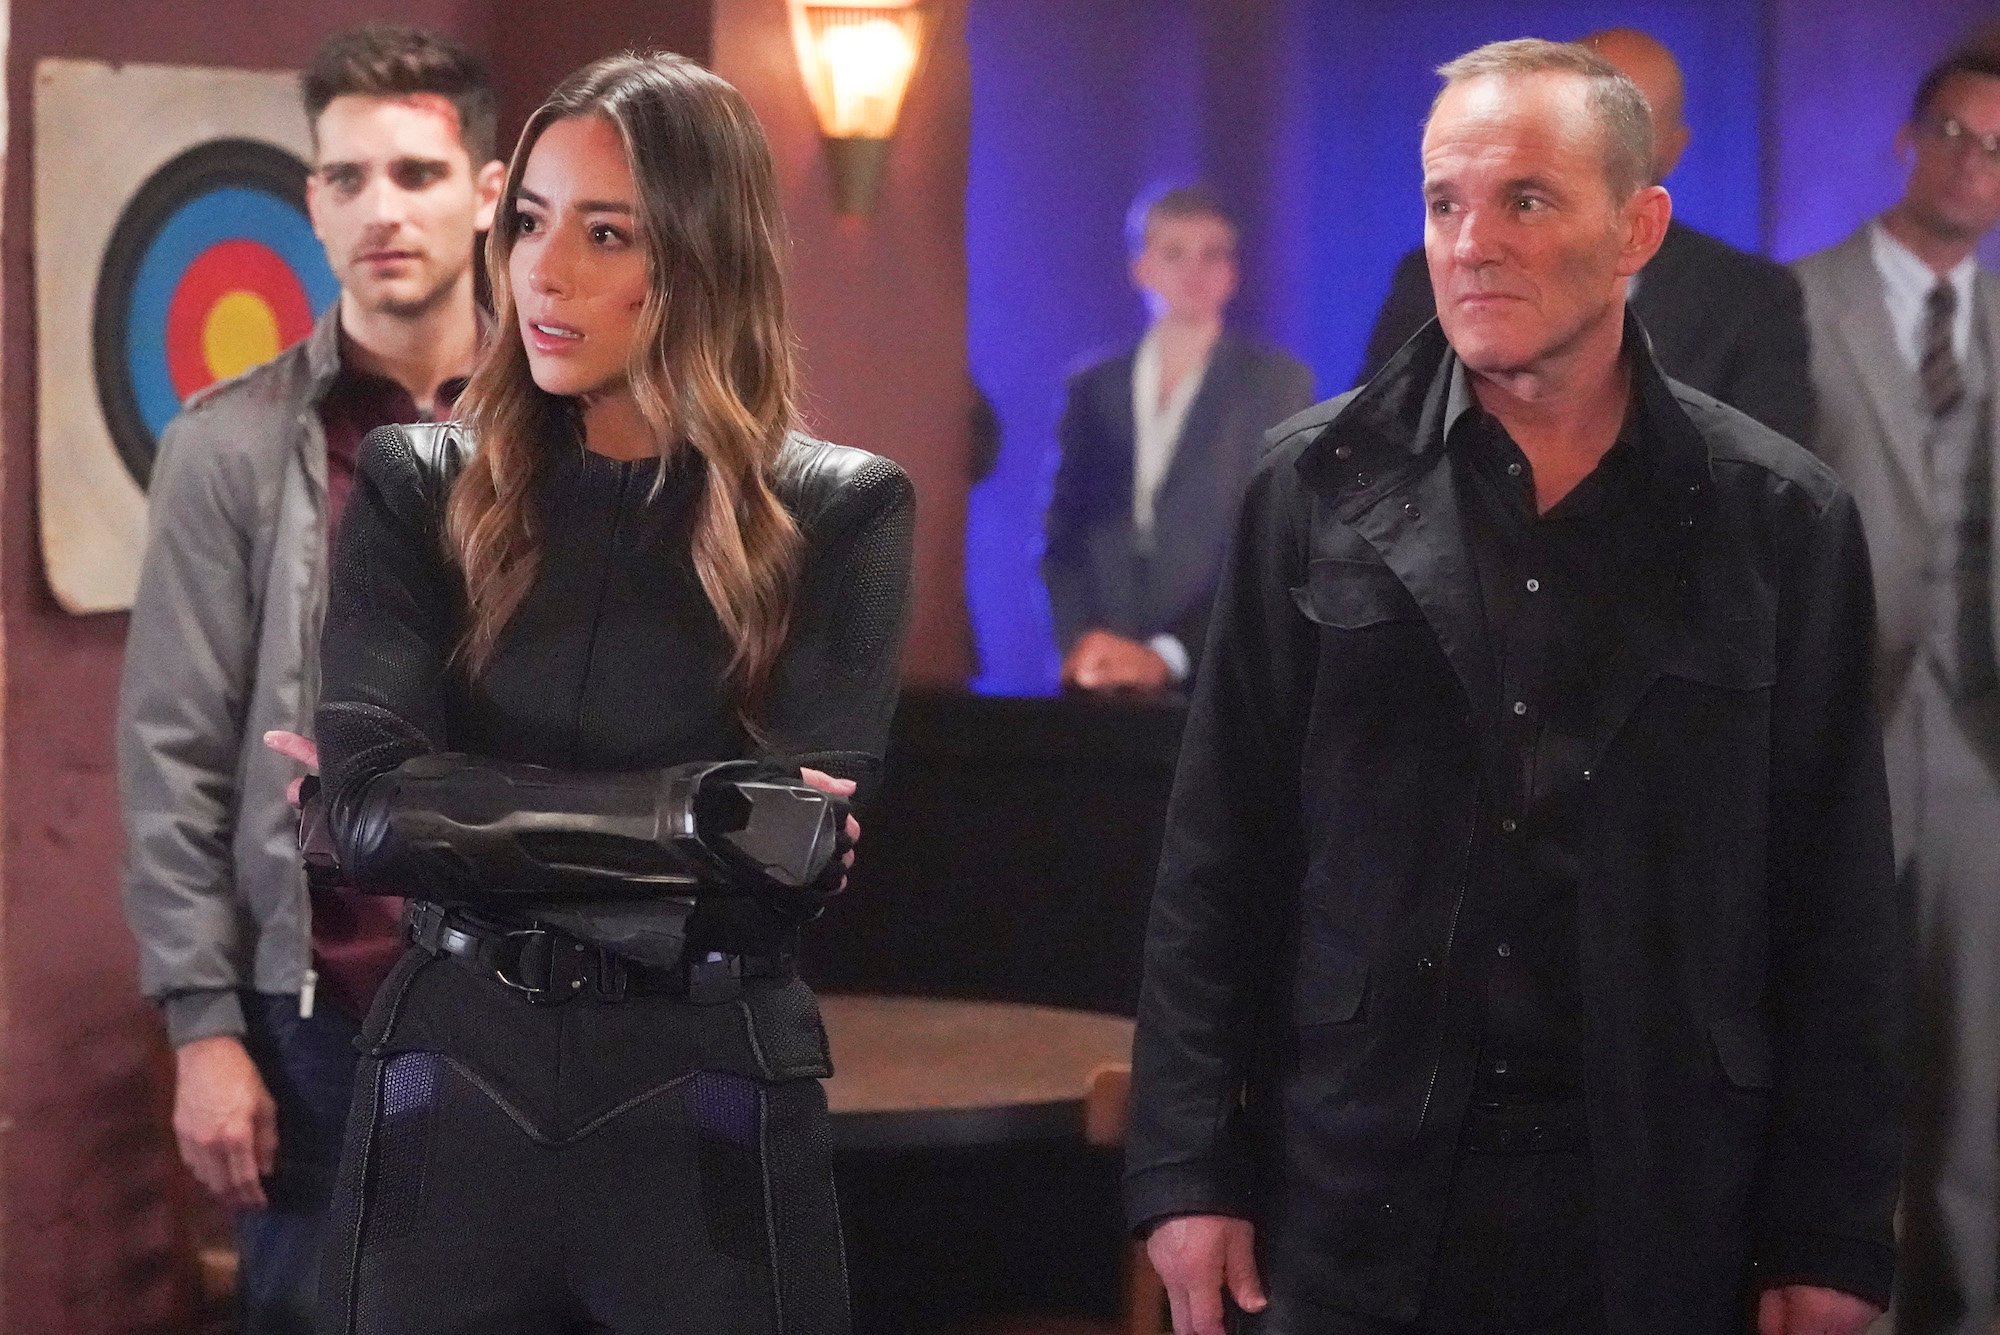 Is ‘Agents of SHIELD’ Worth Finishing? Fans Discuss the Finale’s Payoff